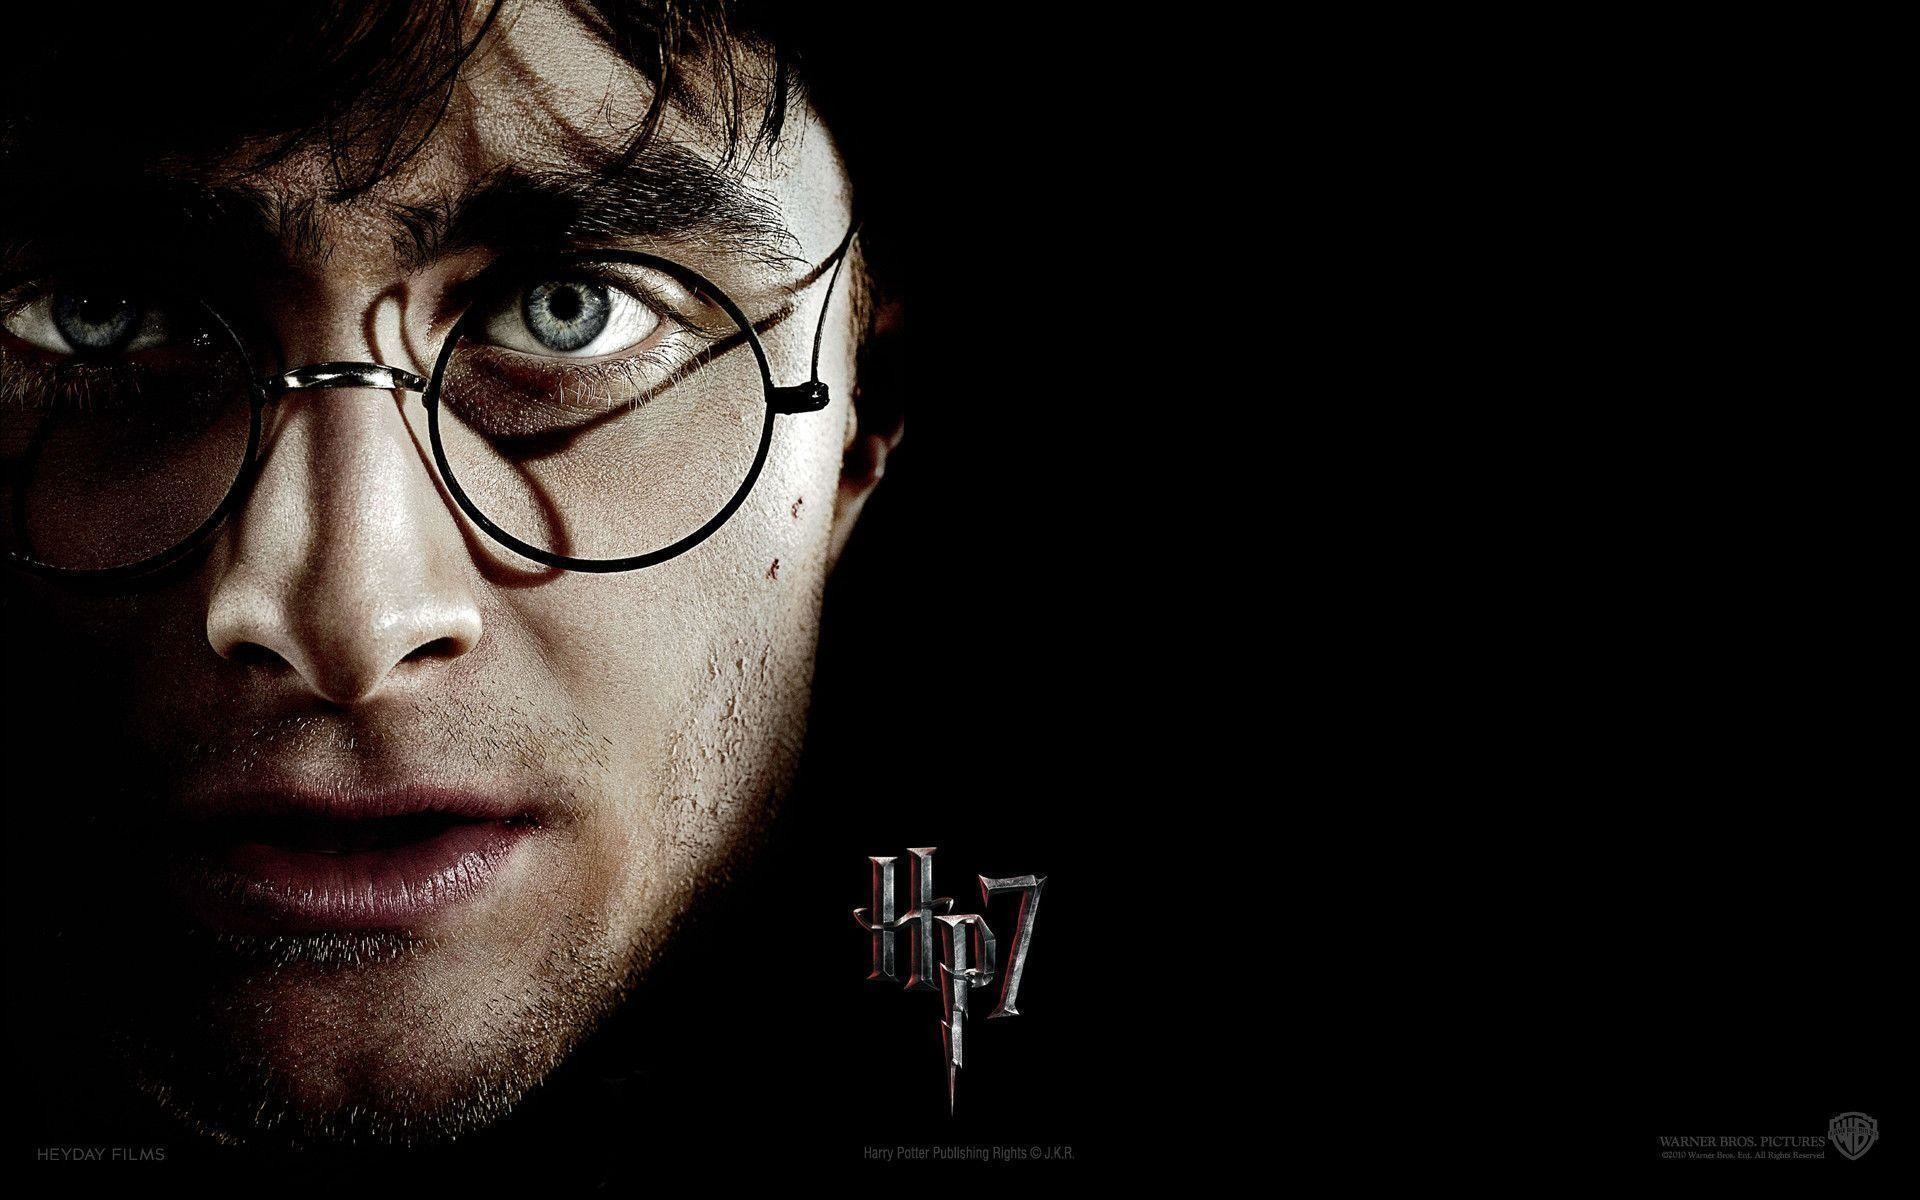 1920x1200 Harry Potter Deathly Hallows Wallpapers - Full HD wallpaper search .